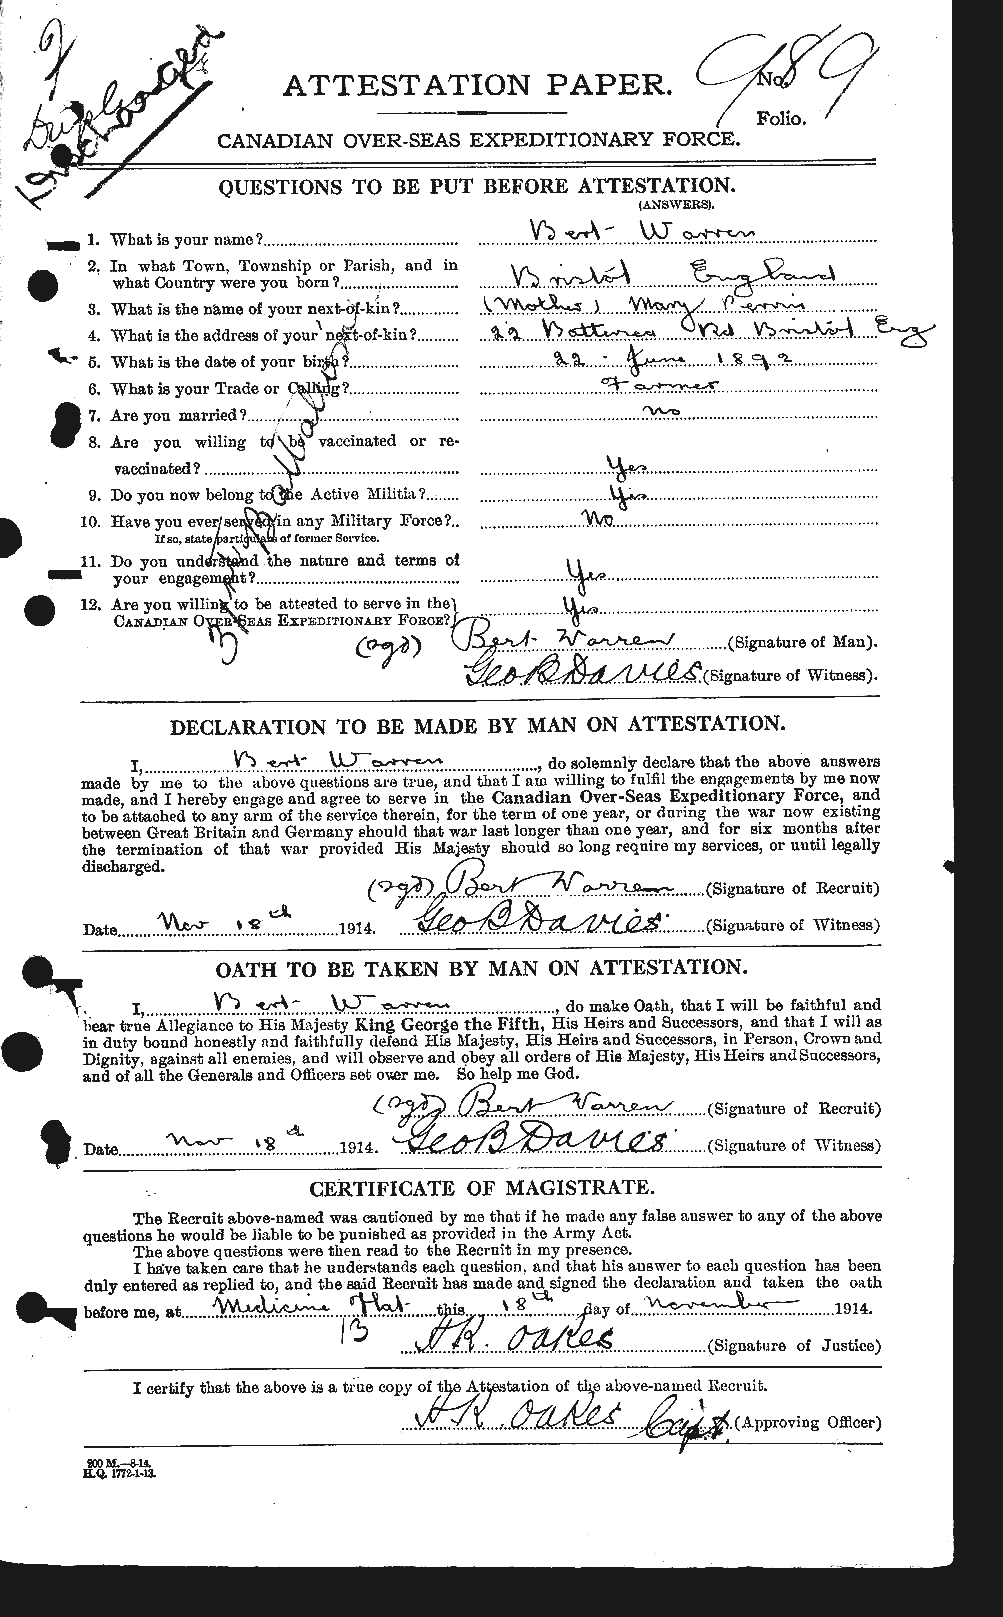 Personnel Records of the First World War - CEF 658373a